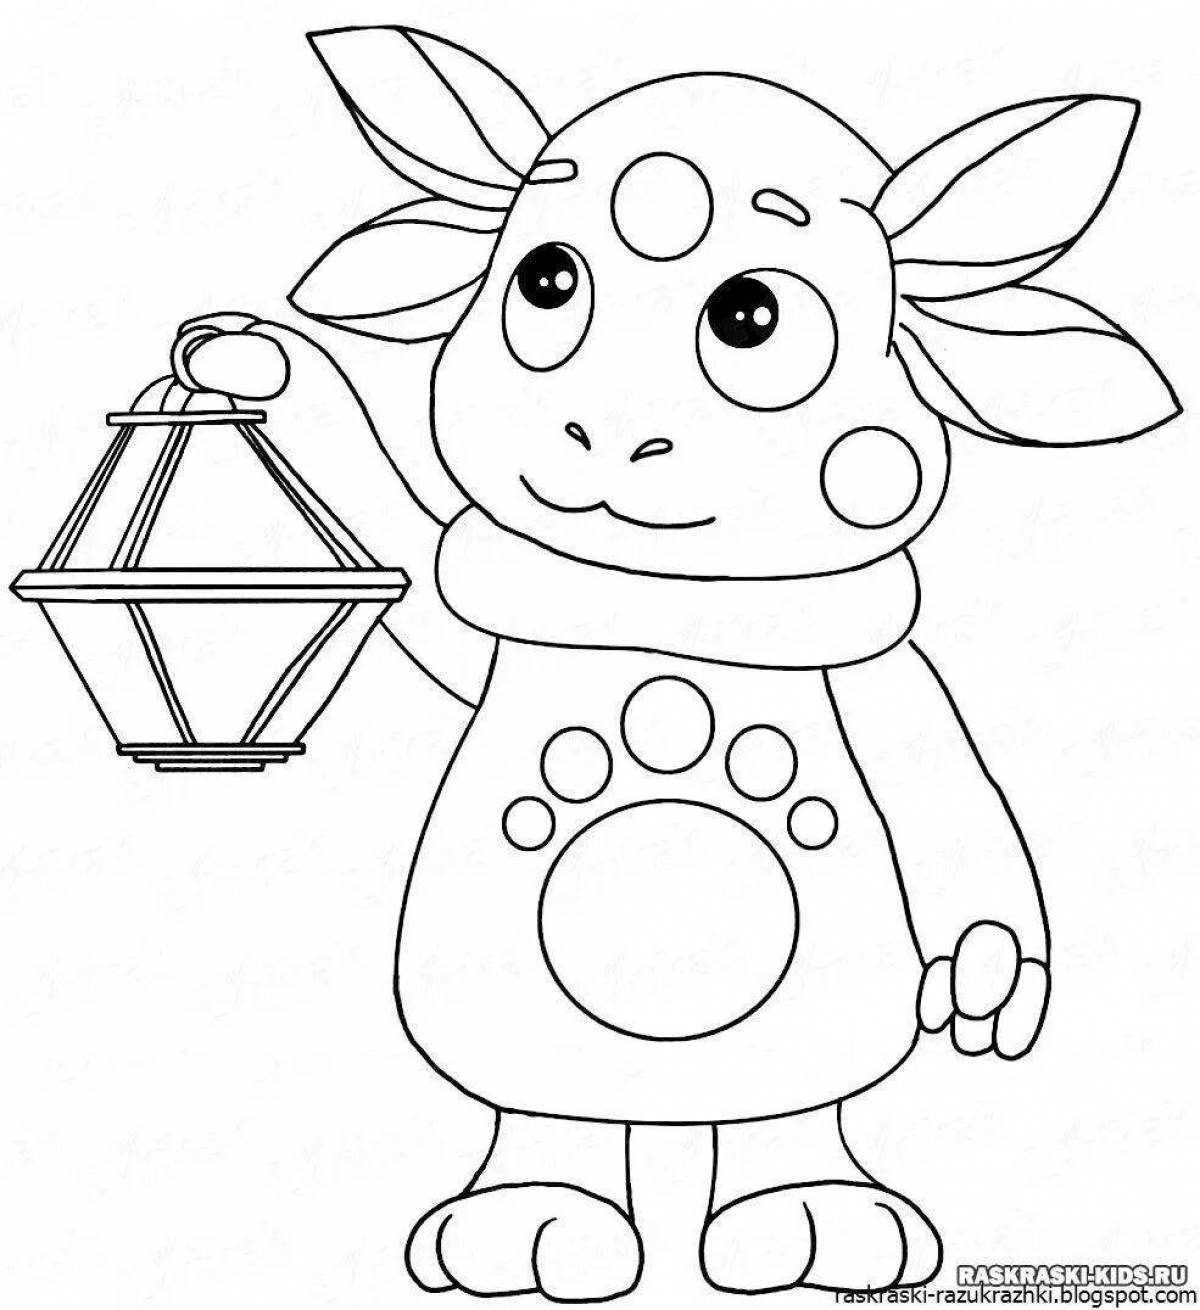 Adorable Luntik coloring book for 3 year olds